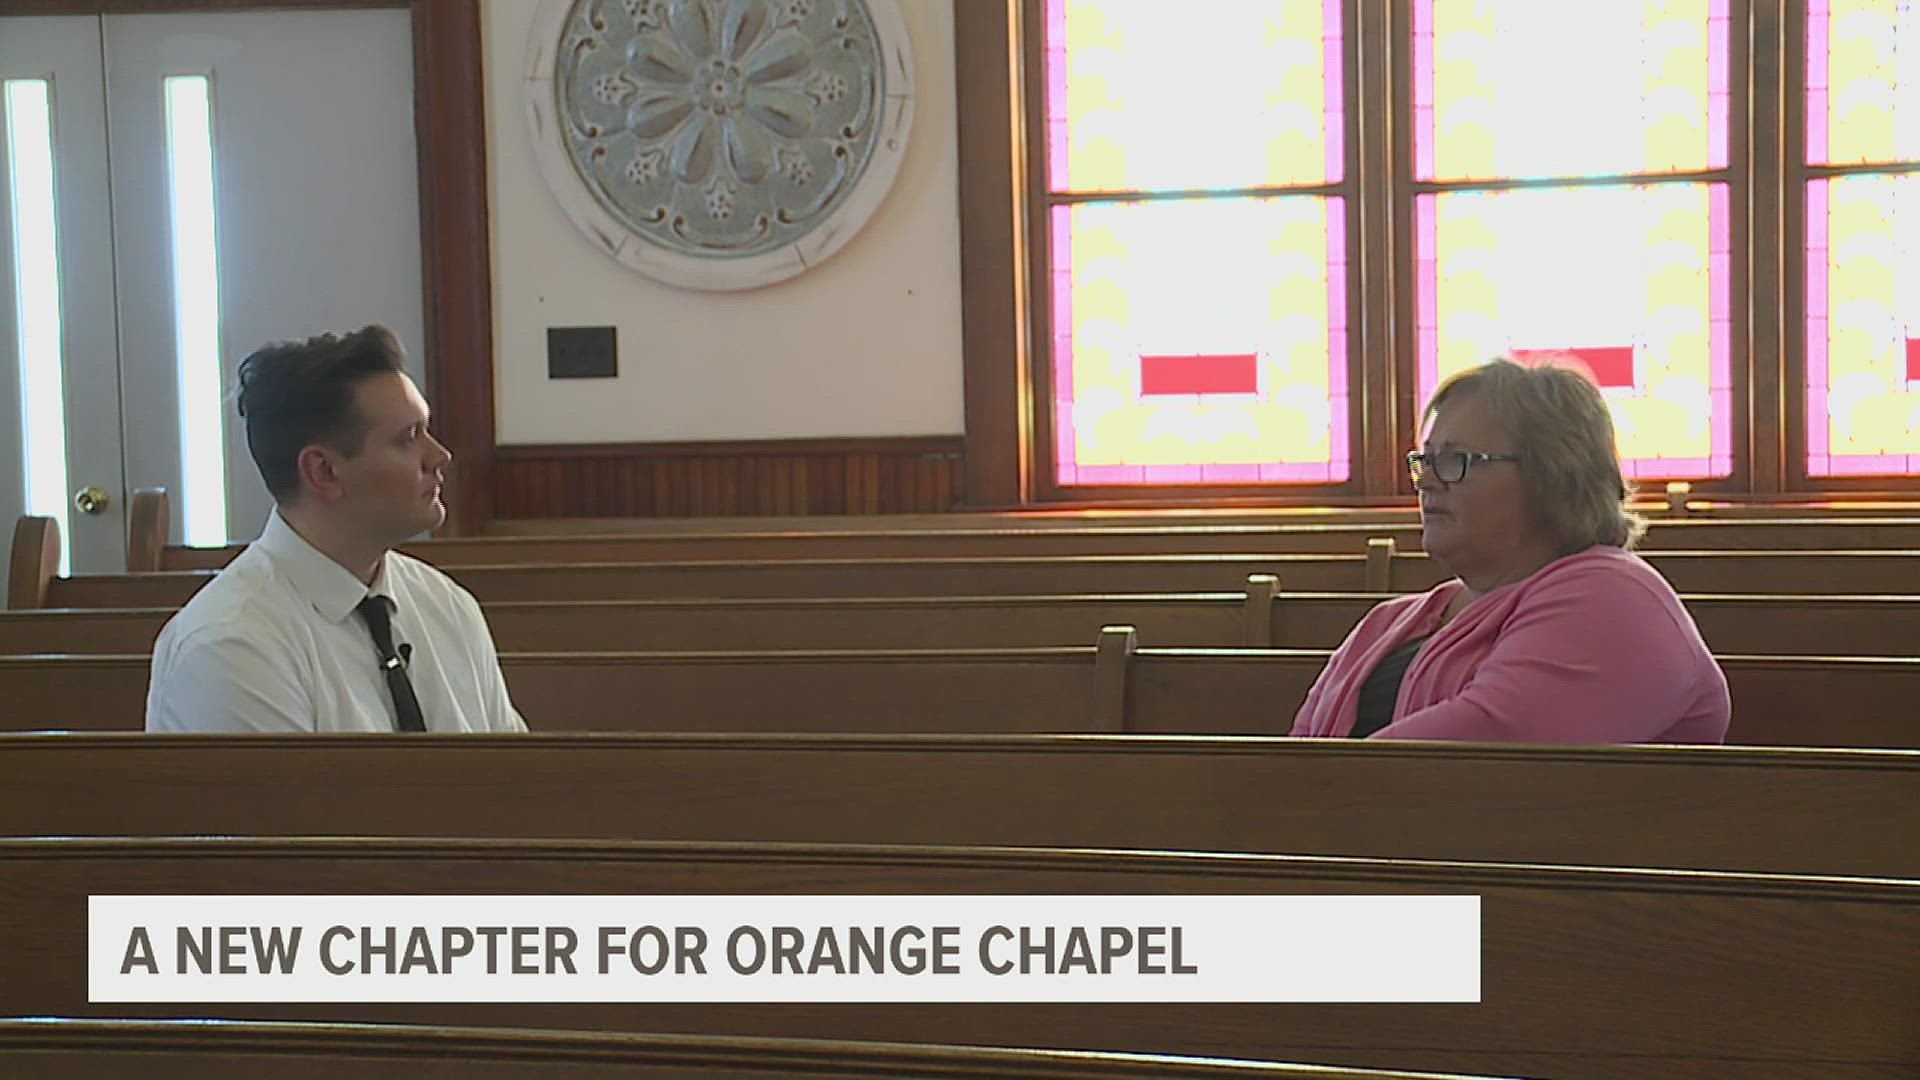 Jolene Eiker purchased Orange Chapel in 2020. She believes more memories need to be made at the property that's operated as a church since before the Civil War.